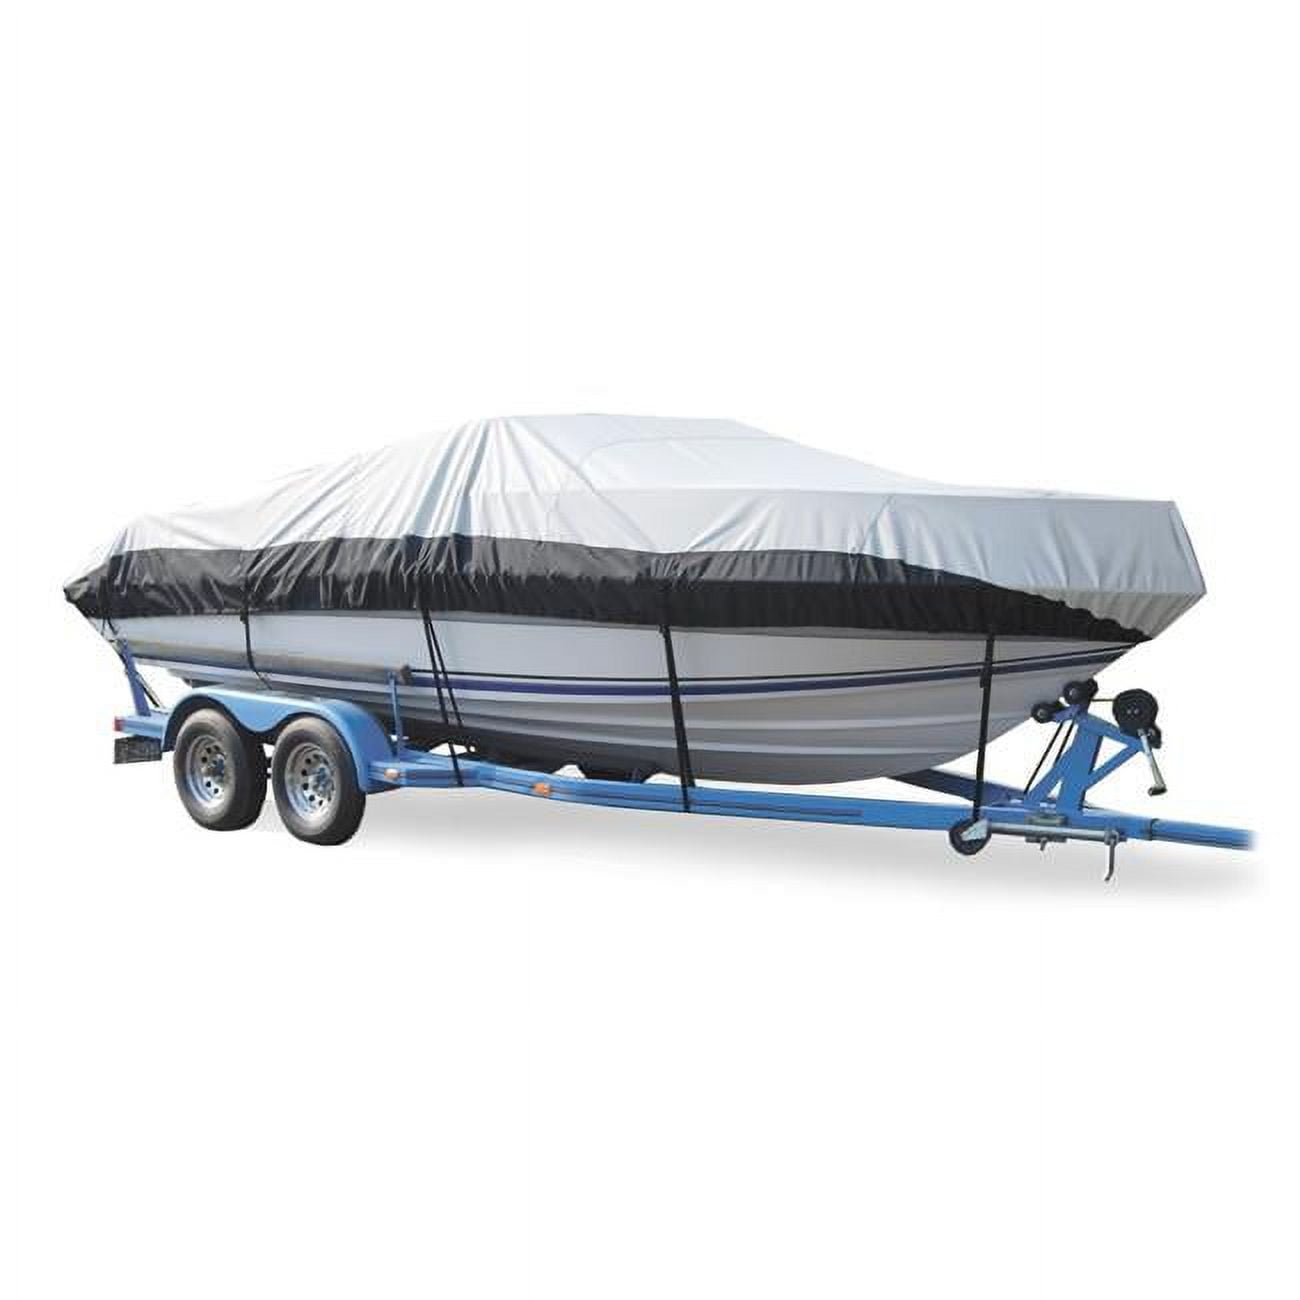 Taylor Made TAM70902 16 ft. x 75 in. Eclipse Fishing Boat Cover, Aluminum 